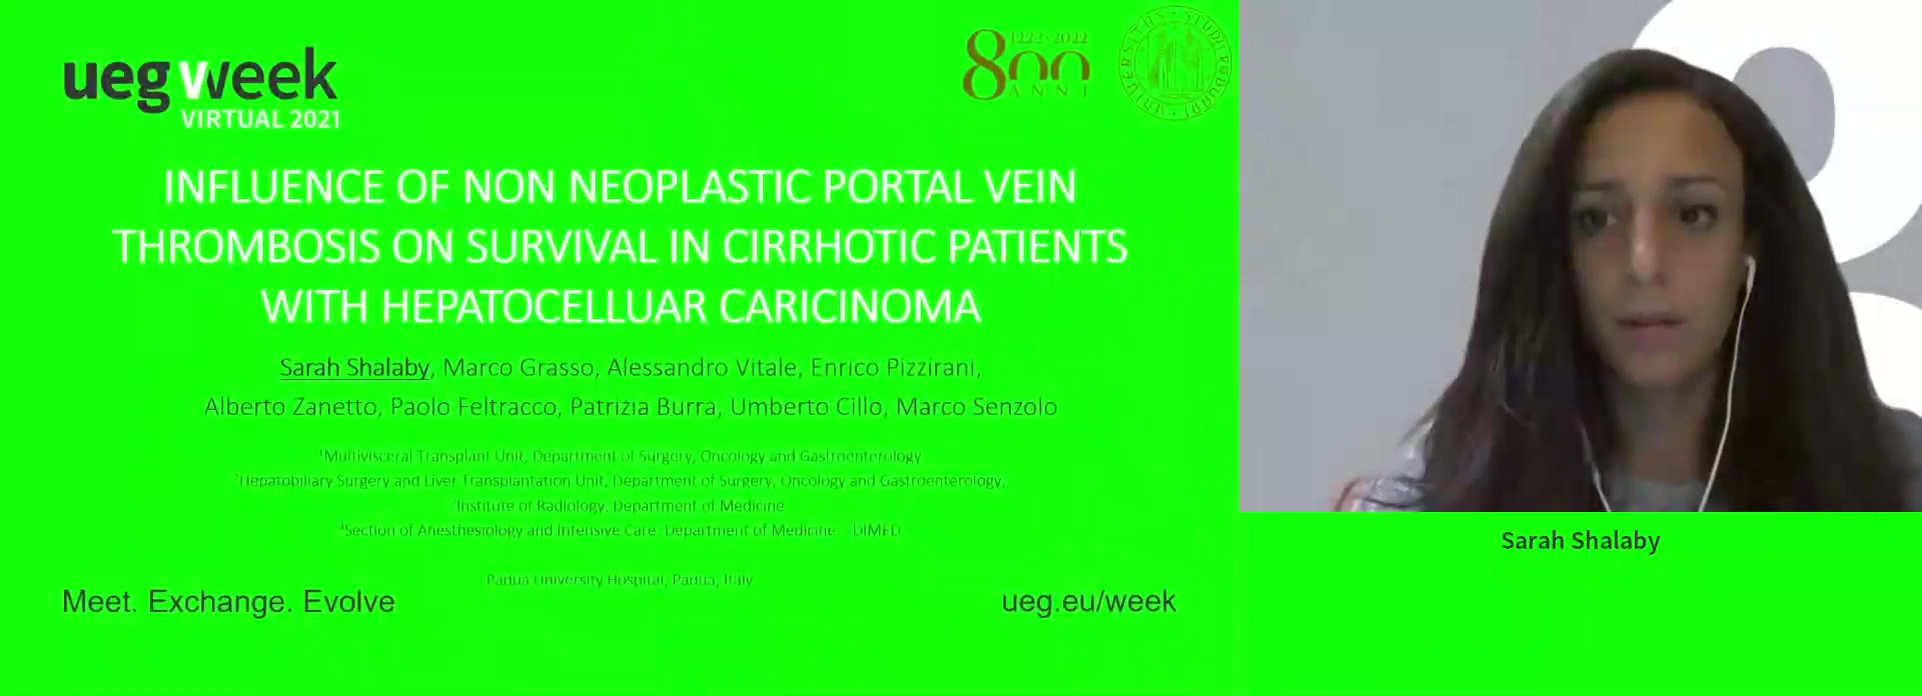 INFLUENCE OF NON NEOPLASTIC PORTAL VEIN THROMBOSIS ON SURVIVAL IN CIRRHOTIC PATIENTS WITH HEPATOCELLUAR CARICINOMA